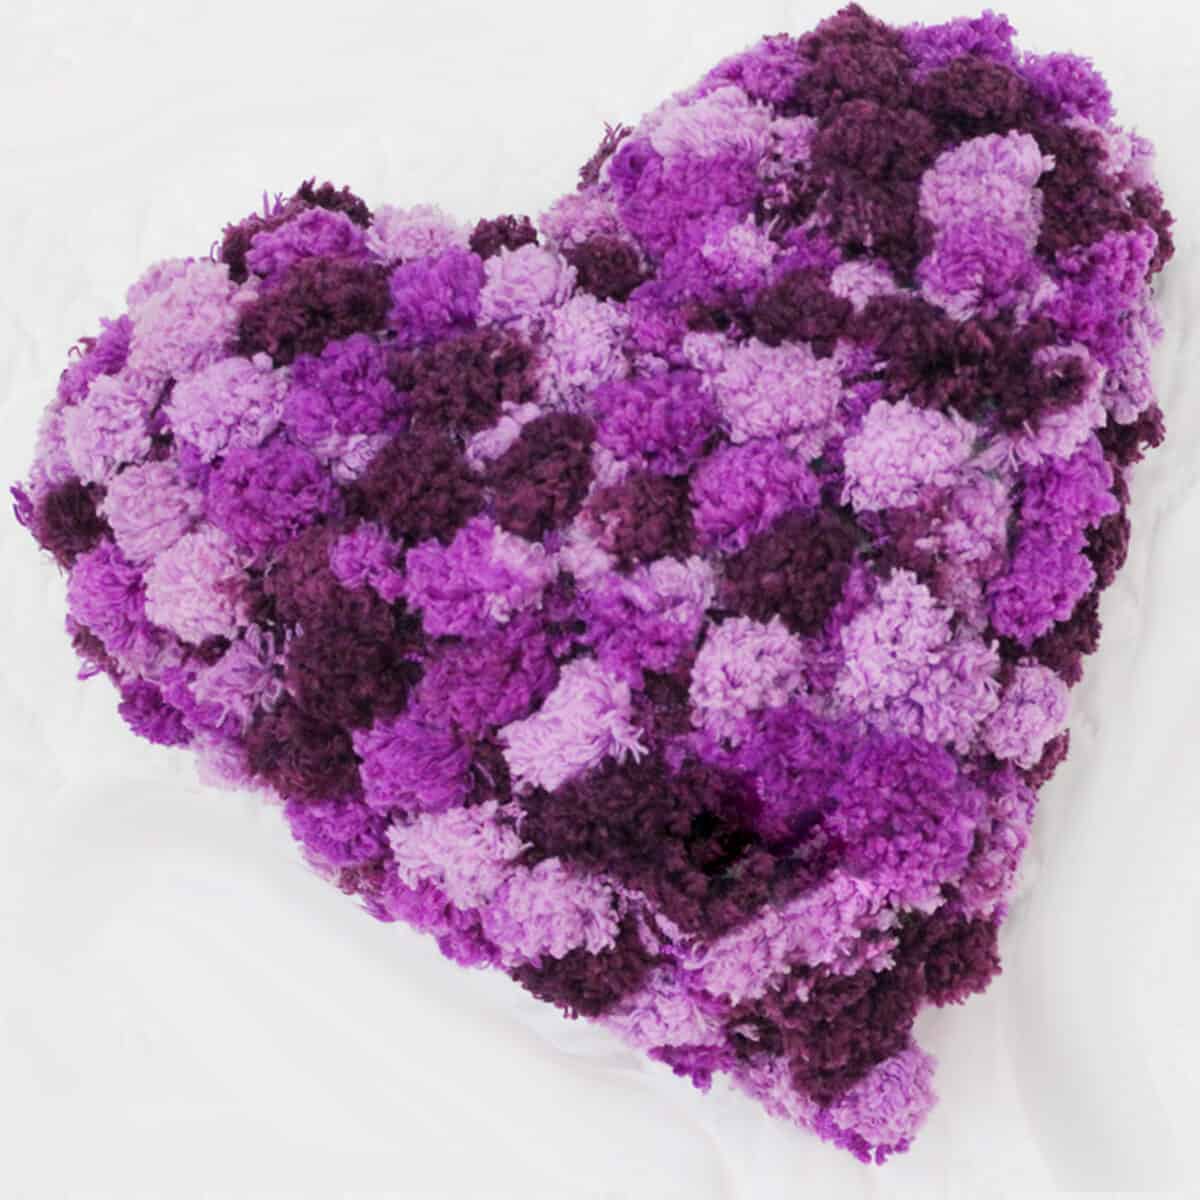 Knitted heart shaped pillow in pom pom yarn in shades of purple yarn color.